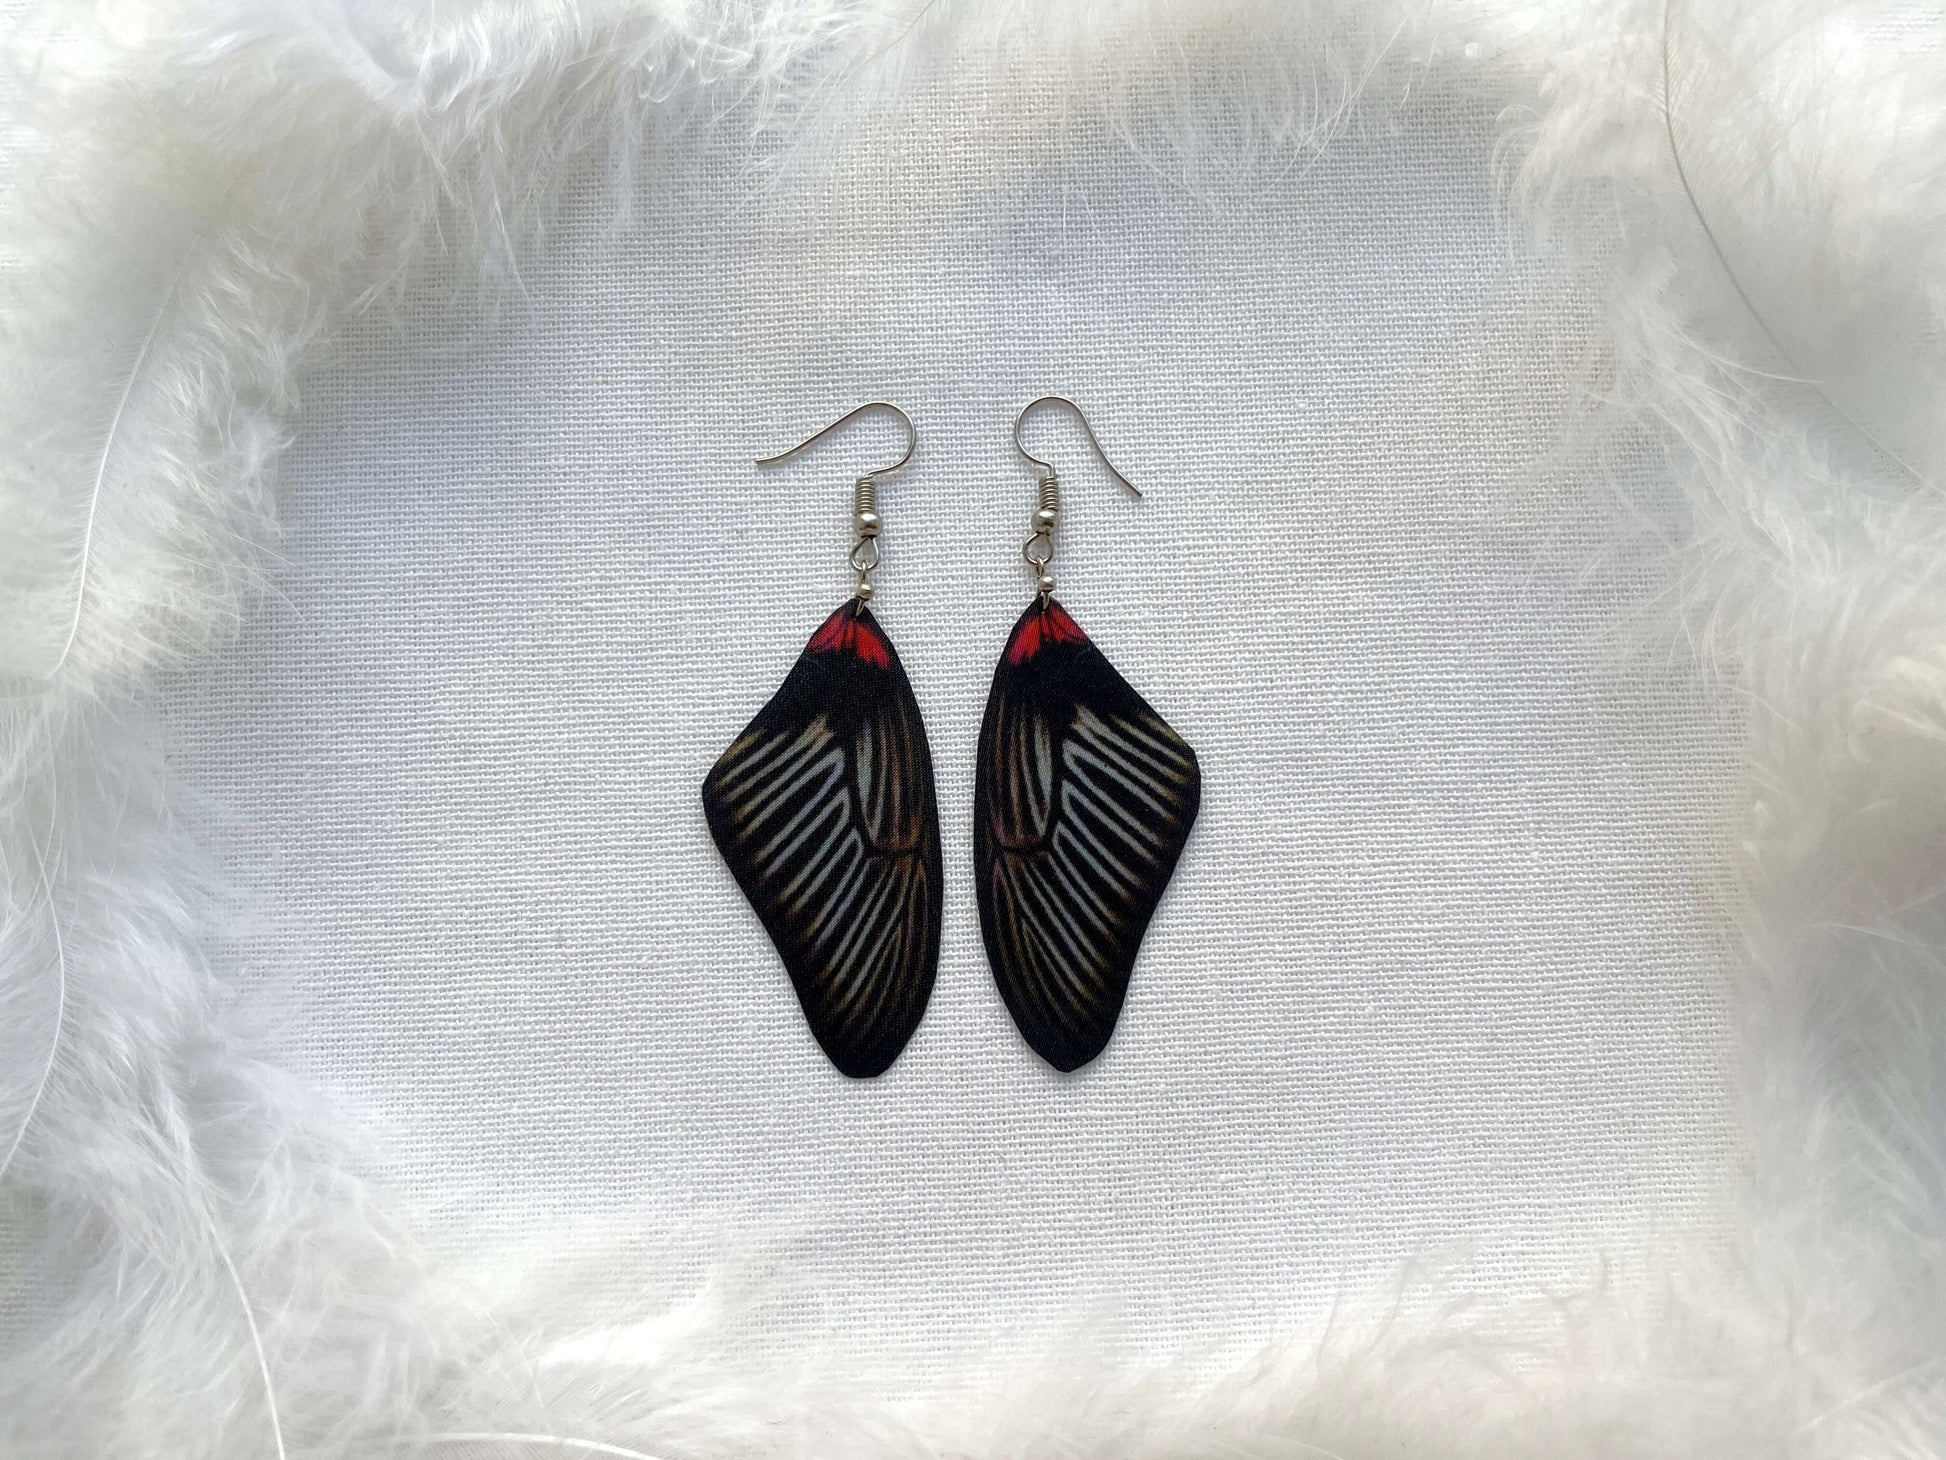 Whimsical Moth Earrings with Black Wings and Intricate Design